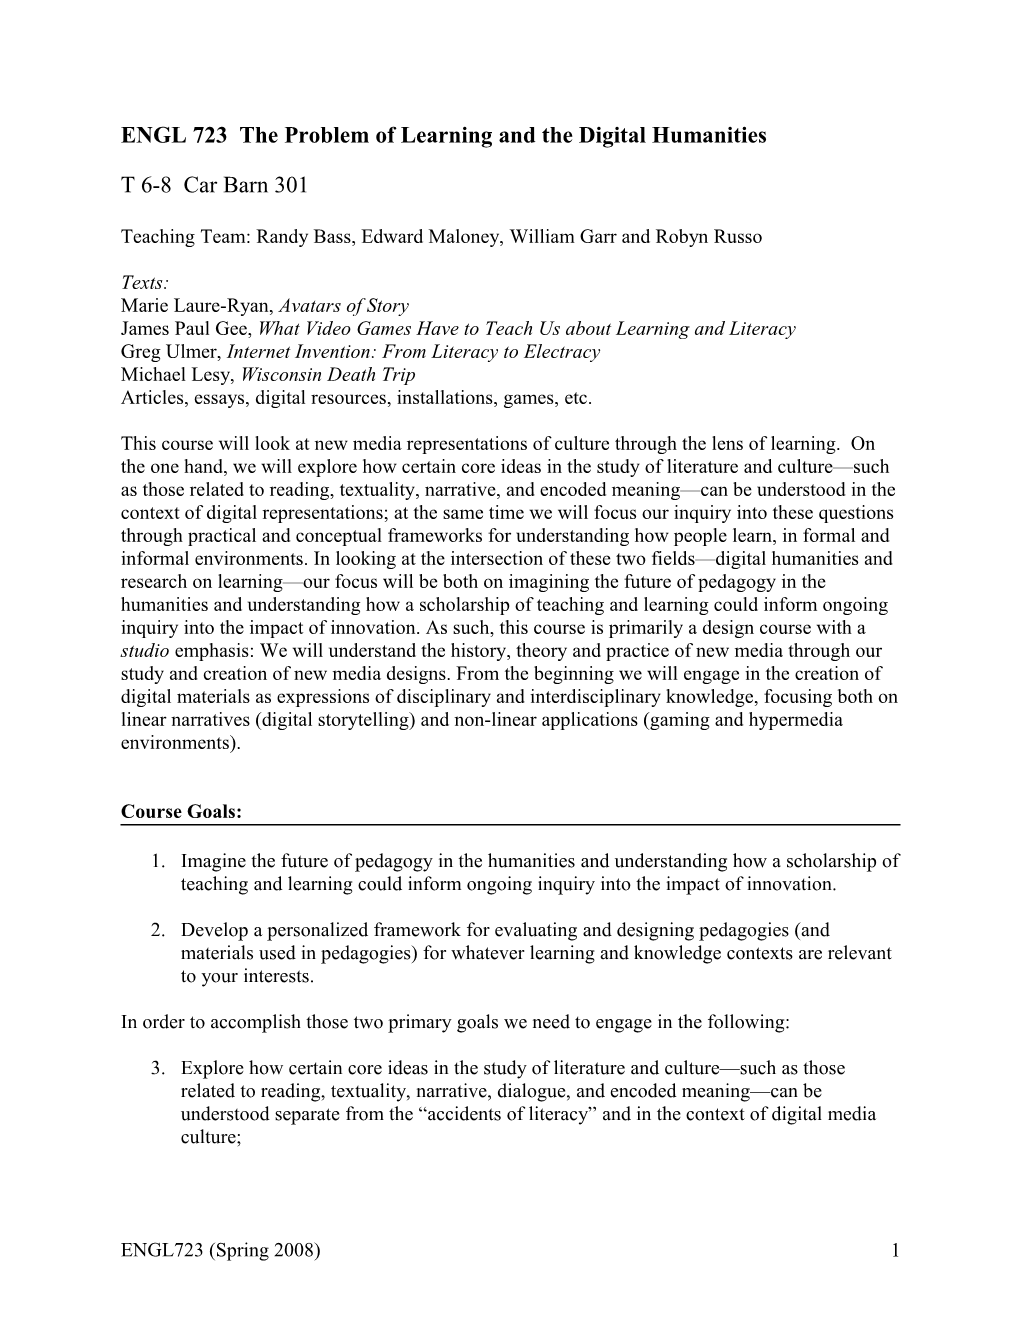 ENGL 723 the Problem of Learning and the Digital Humanities